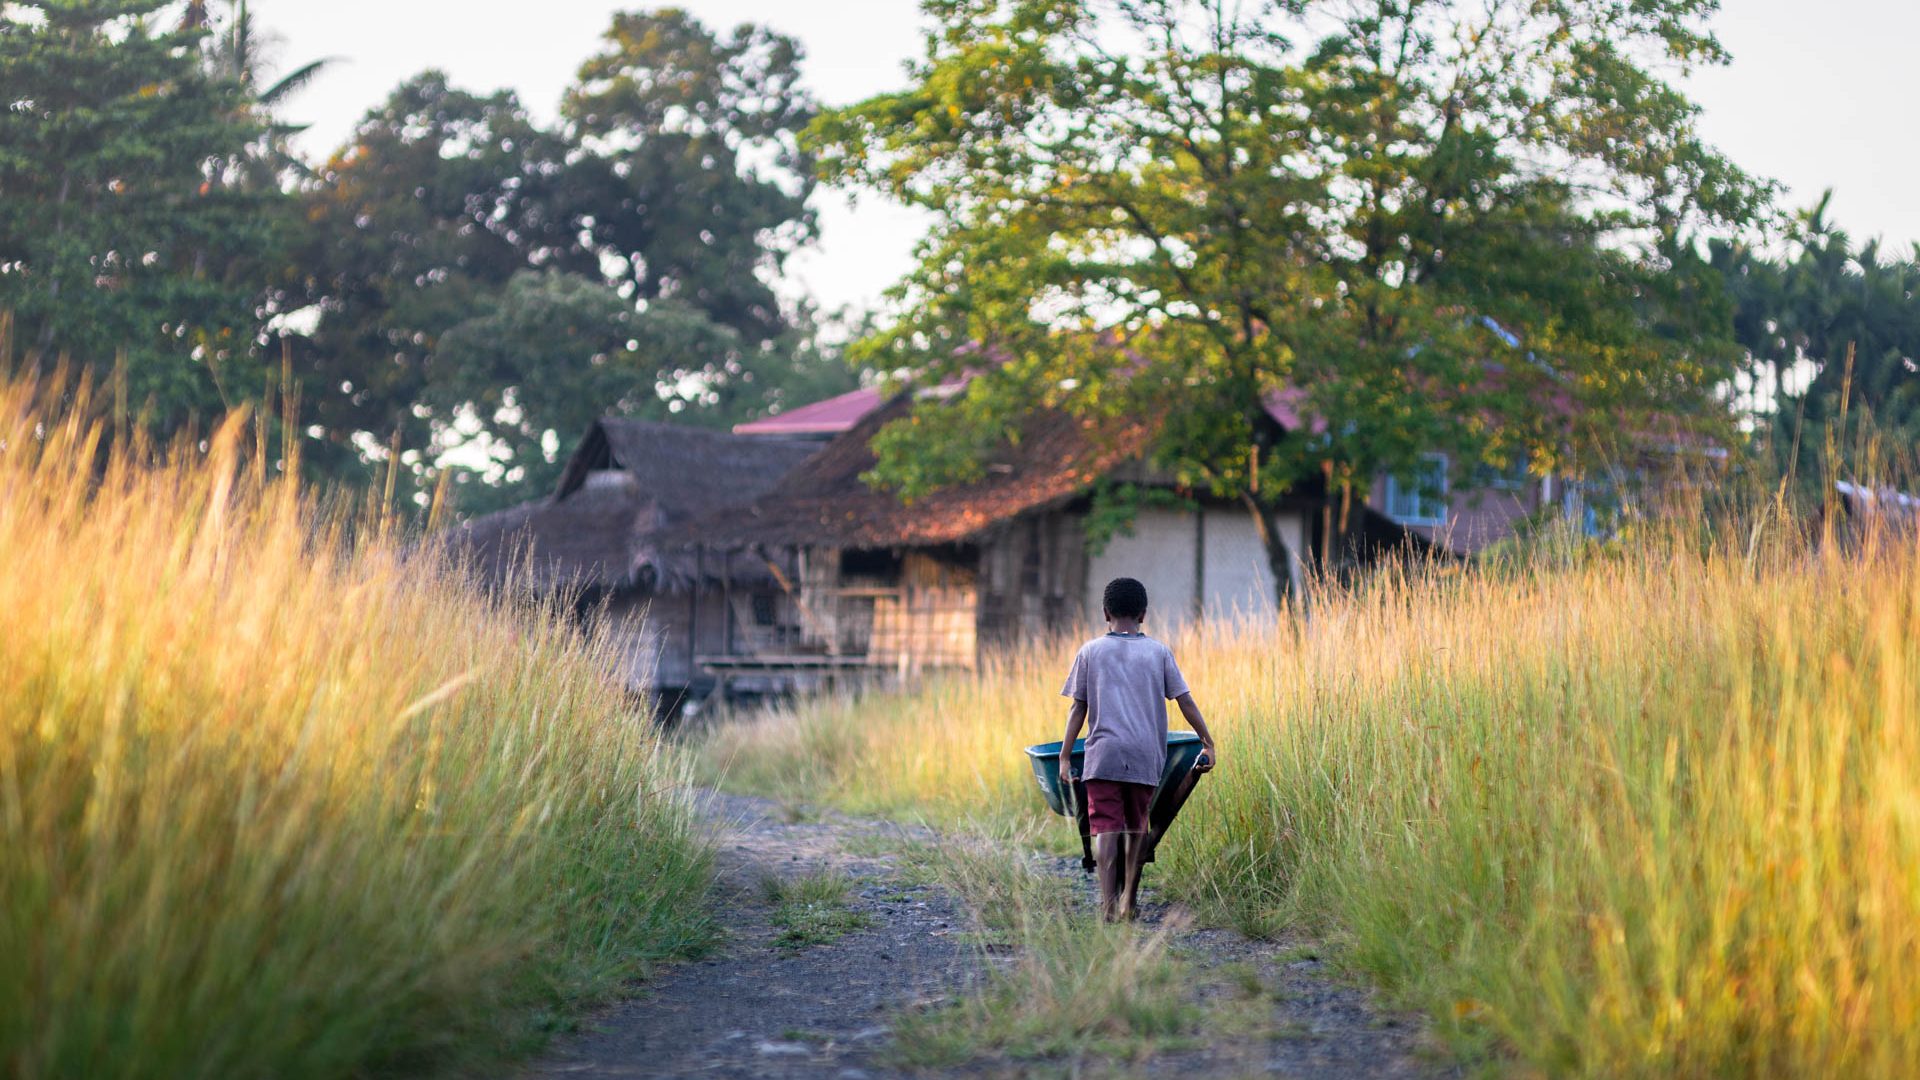 A boy pushes a wheelbarrow away from the camera towards some houses in warm light. The path is edged by long grasses.